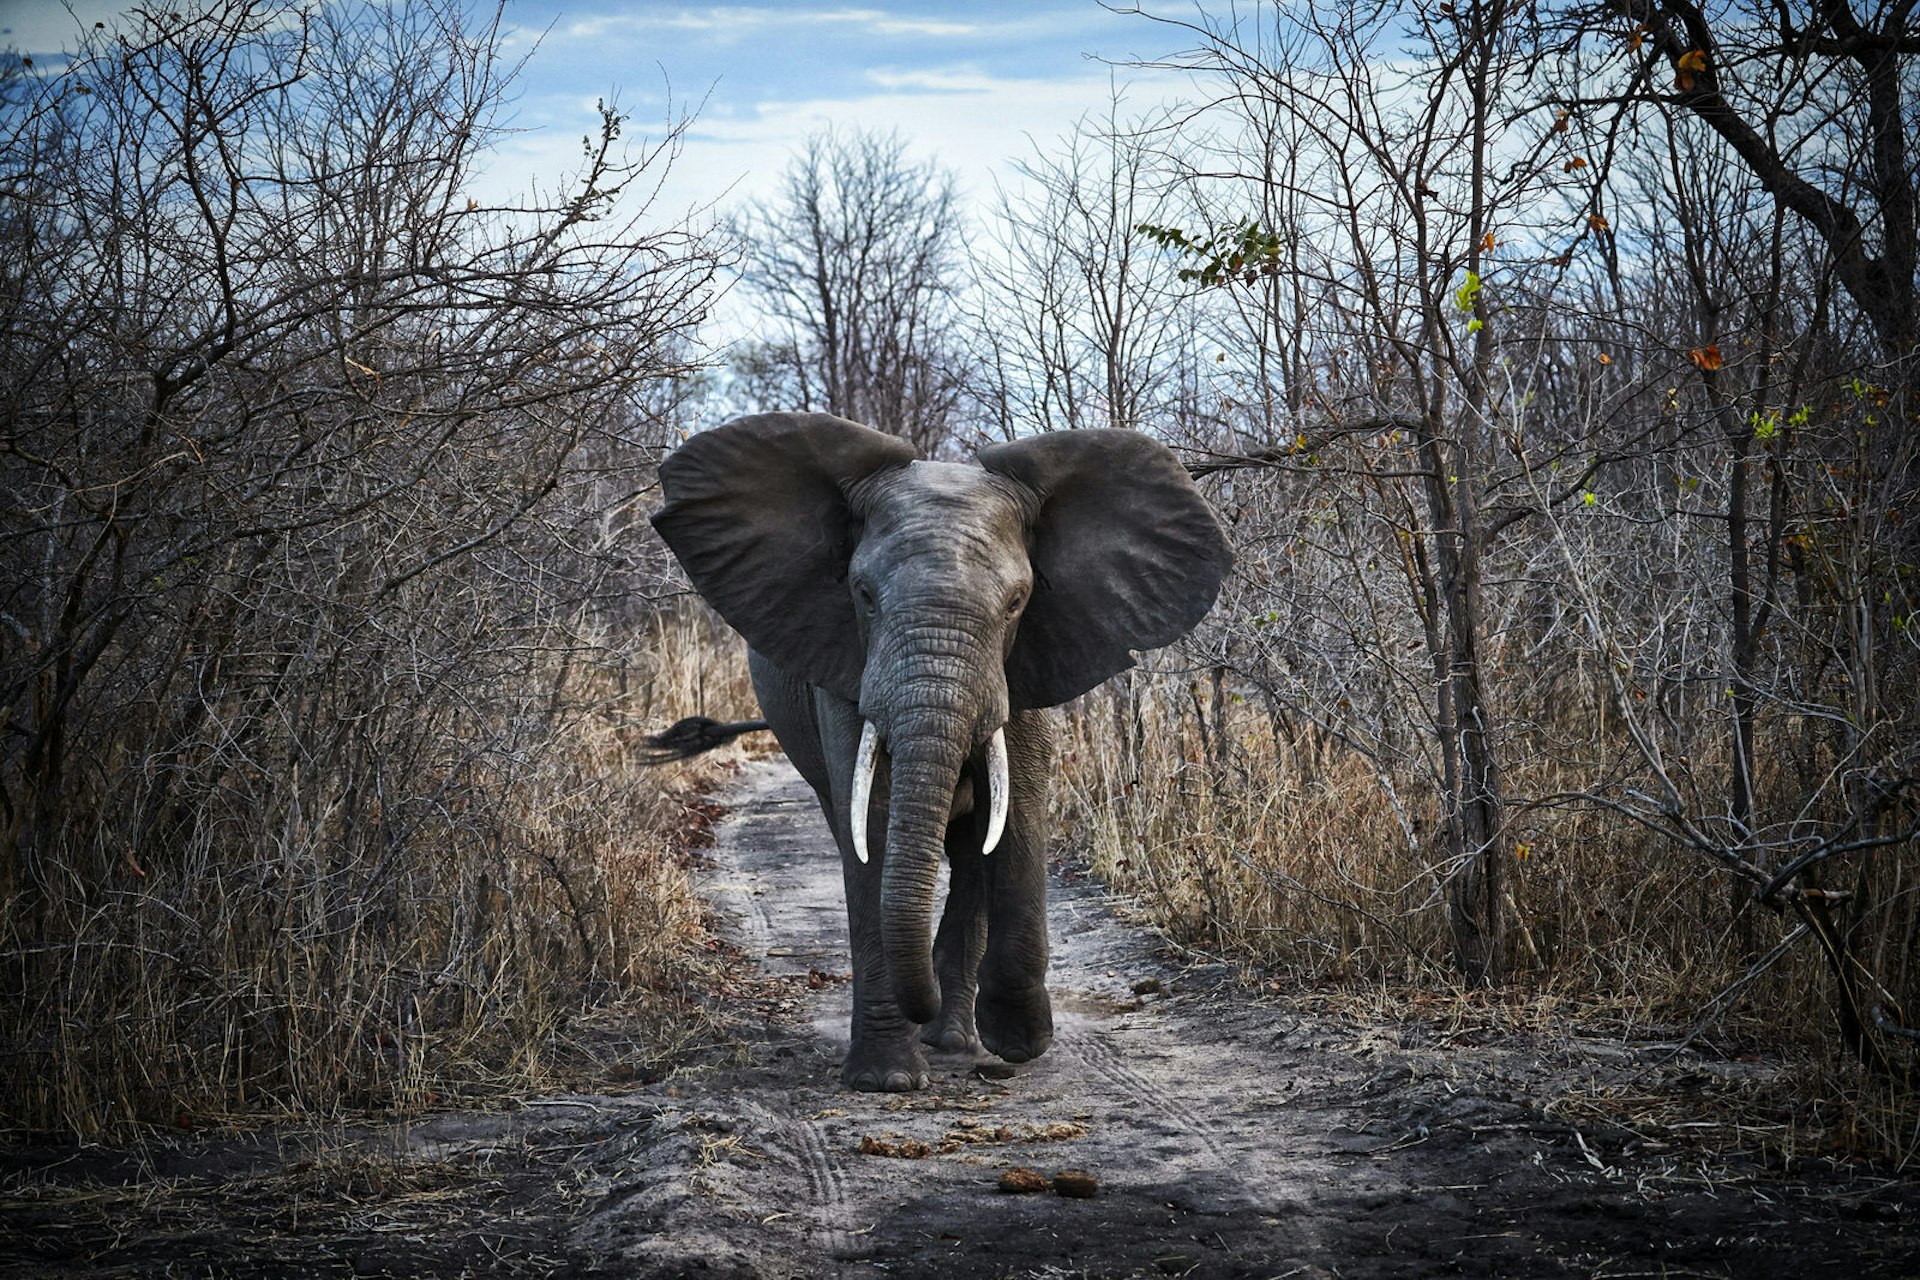 An elephant at Liwonde National Park walking towards the camera, with leafless trees on either side of it